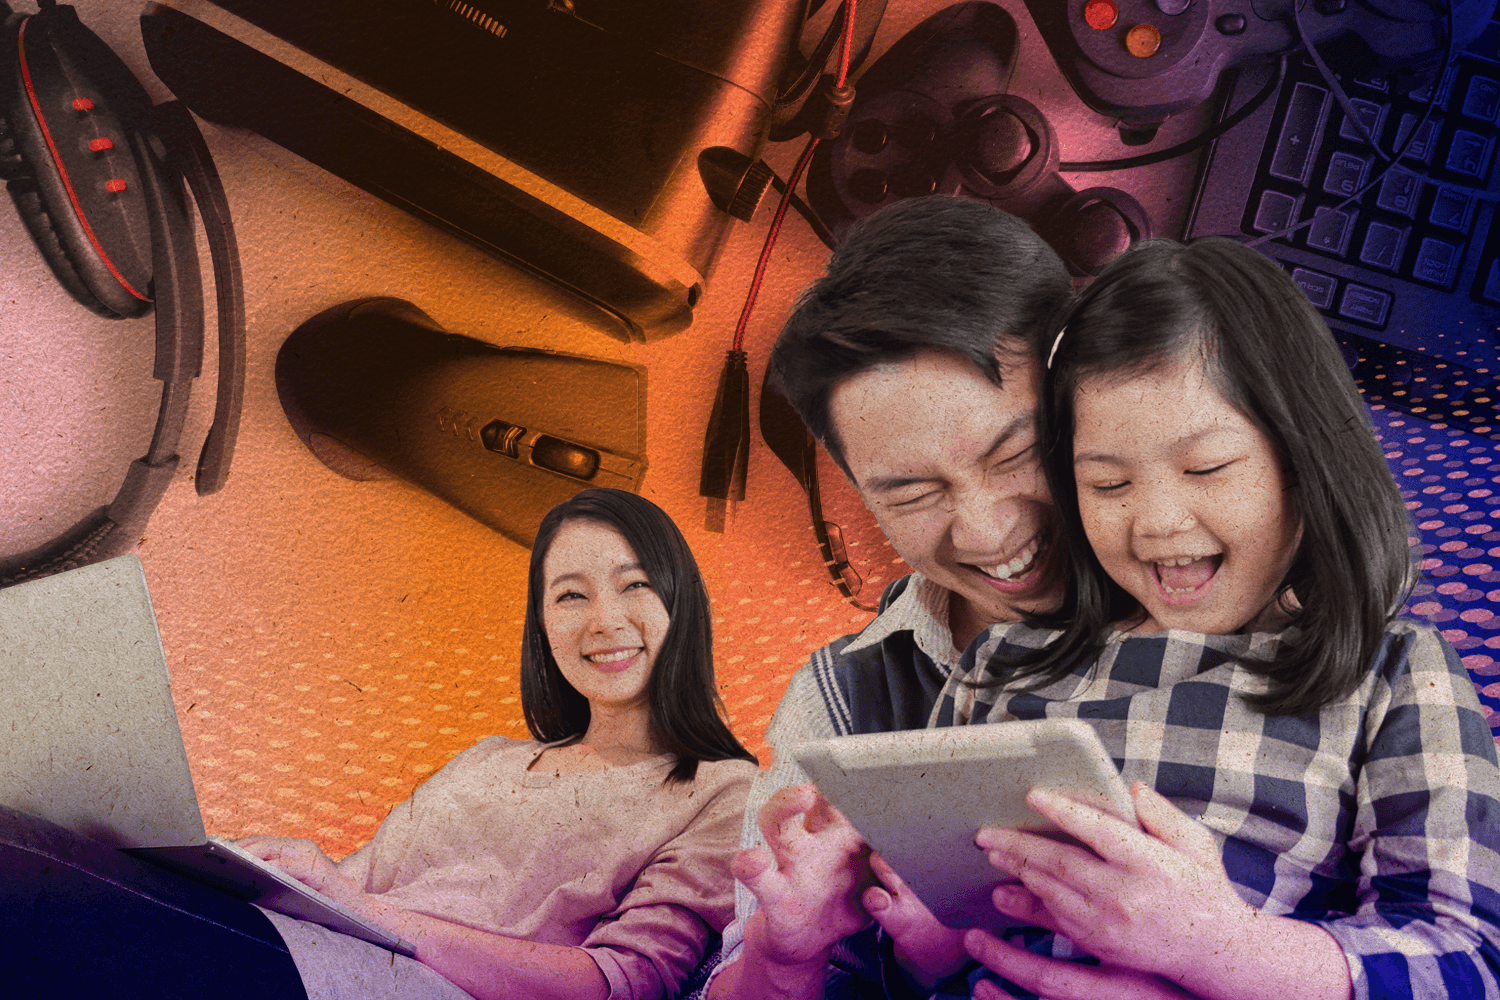 Gaming in the Philippines, family bonds over online games